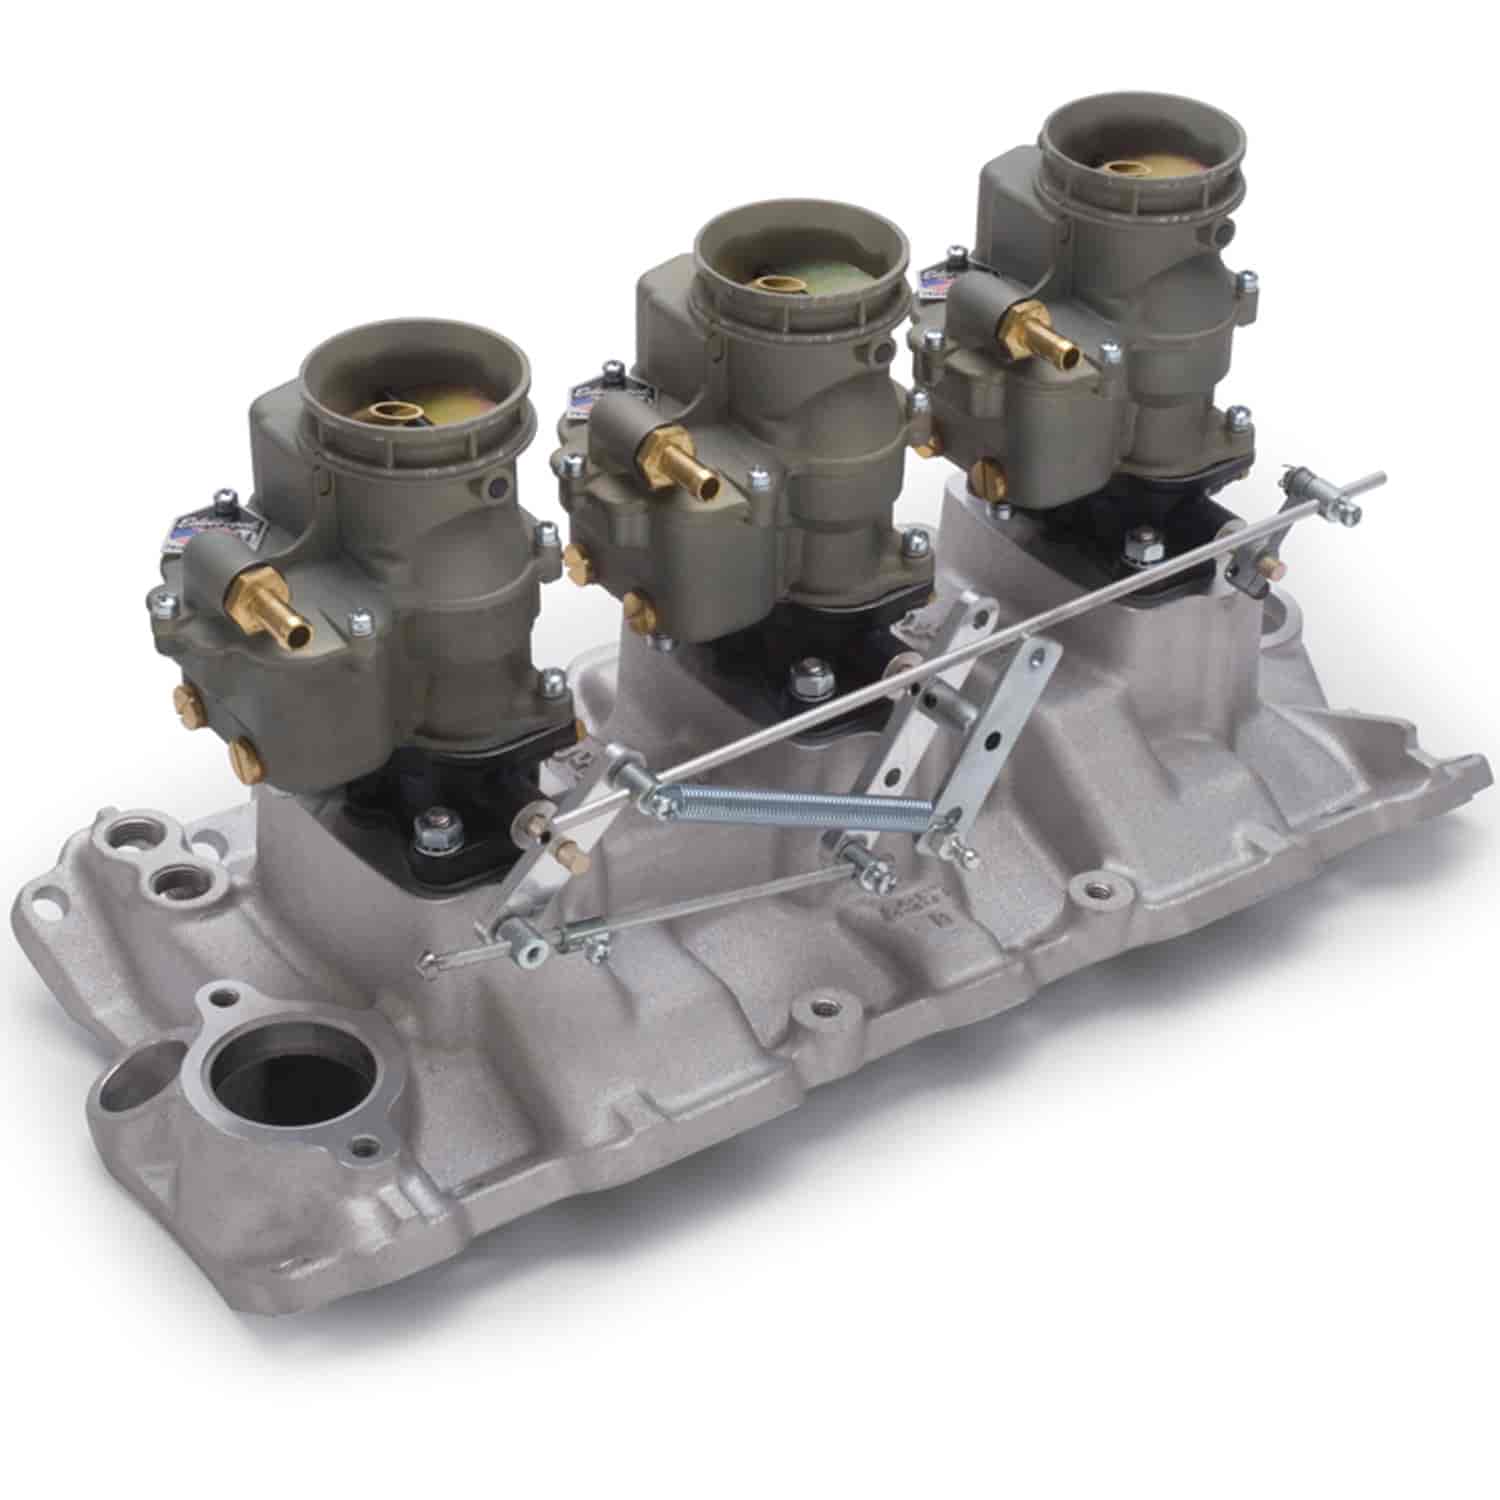 Vintage 94 Series Triple Carburetor and Manifold Kit for 1955-1986 Small Block Chevy with Vortec Heads